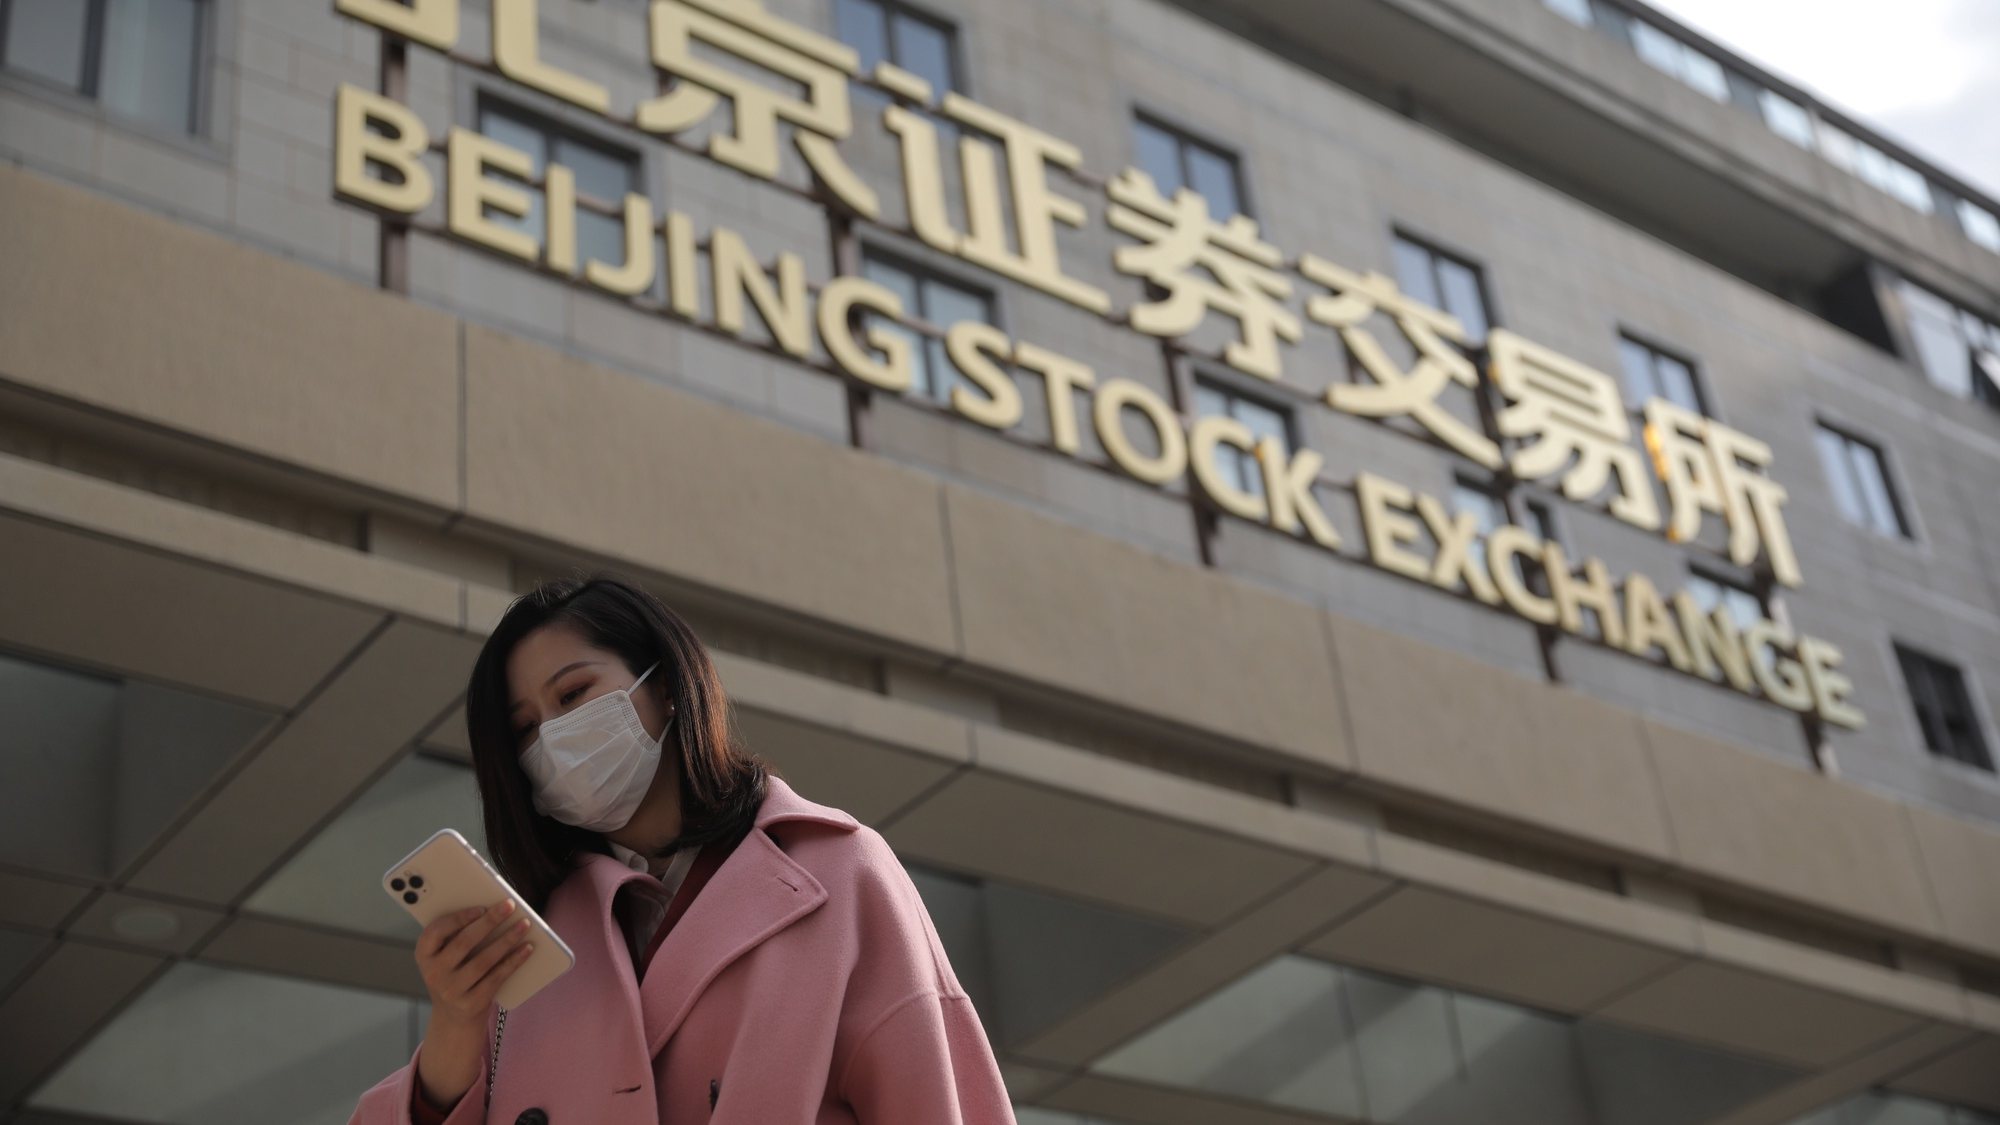 epa09582755 A woman stands outside the new Beijing Stock Exchange building at the Financial Street in Beijing, China, 15 November 2021. The Beijing Stock Exchange opens on 15 November, with the aim of nurturing more technologically advanced small and medium-sized enterprises.  EPA/WU HONG